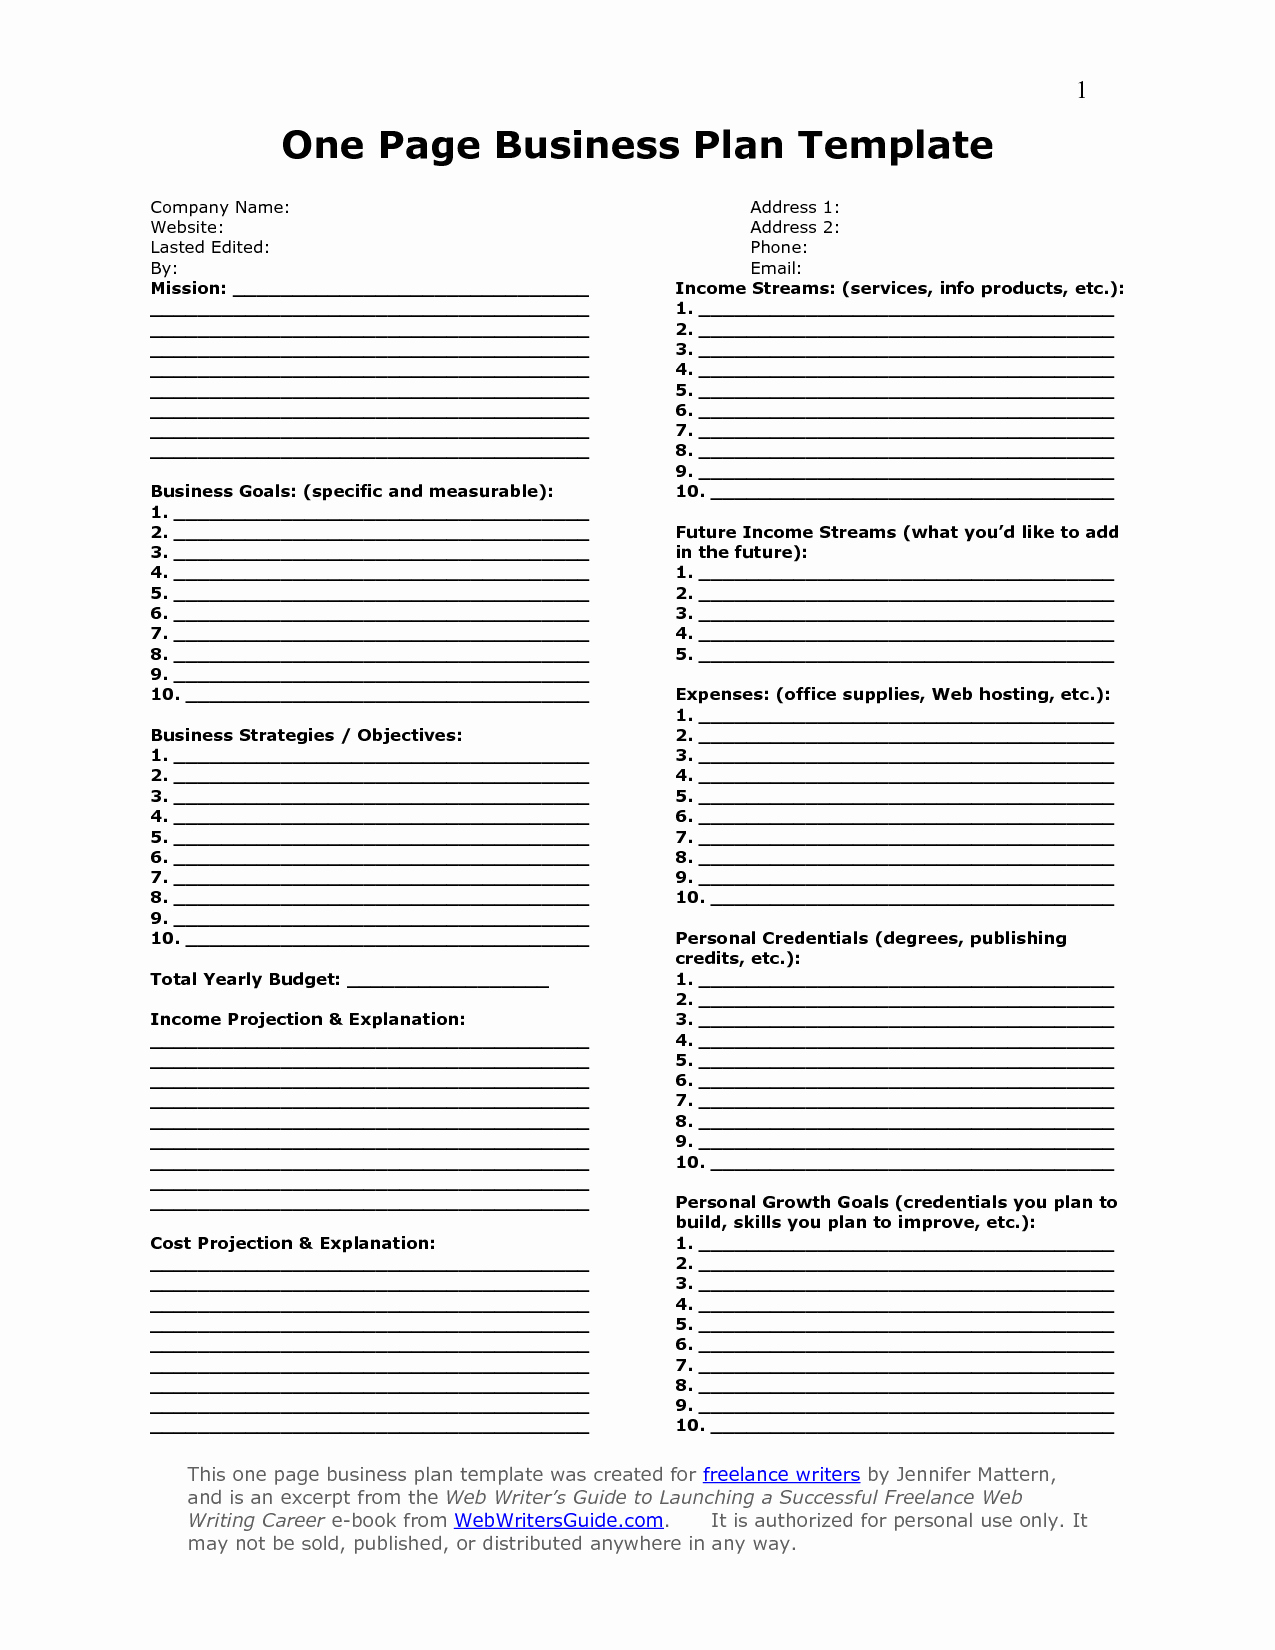 One Page Proposal Template Doc Elegant E Page Business Plan Template